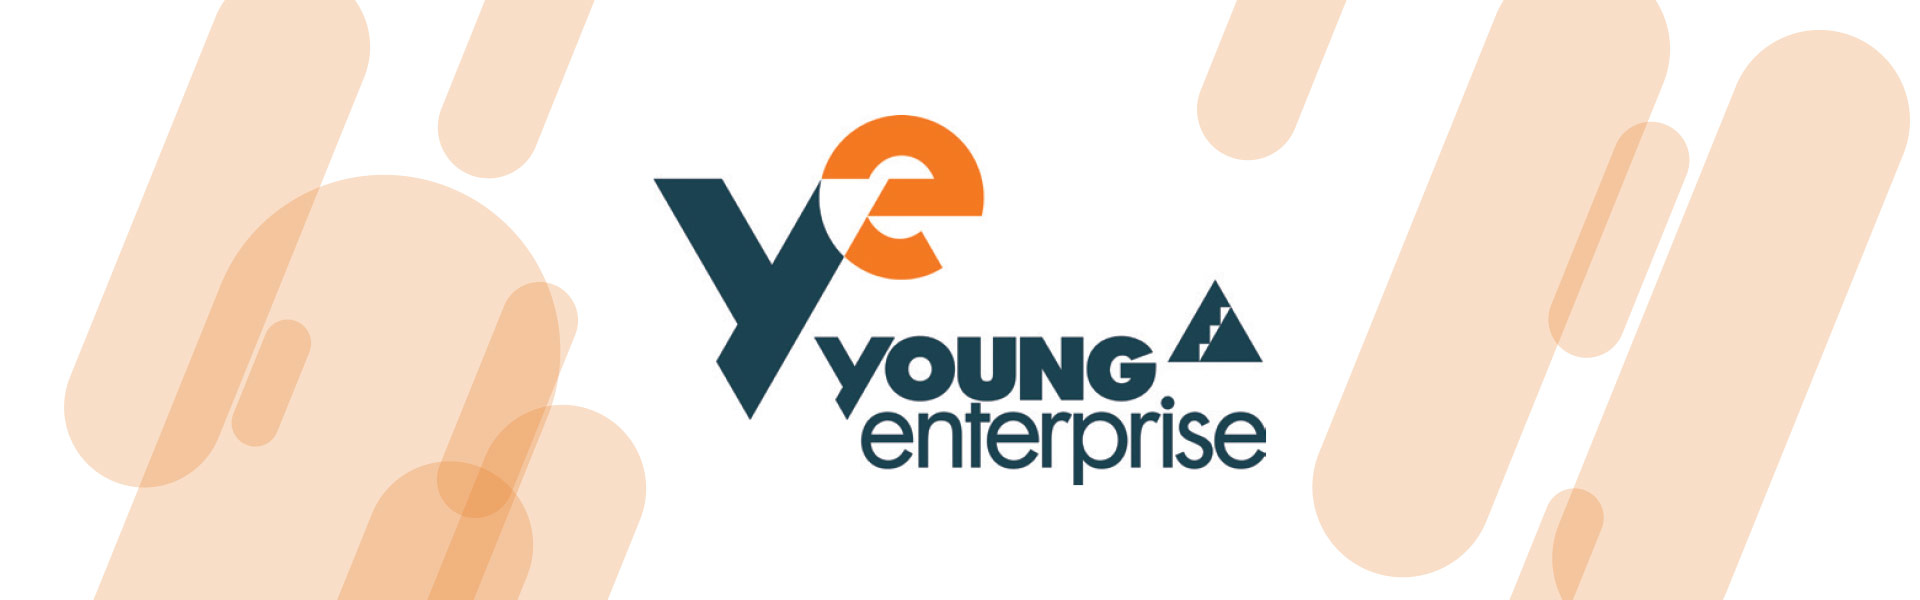 Building Work-Ready Youth through Young Enterprise